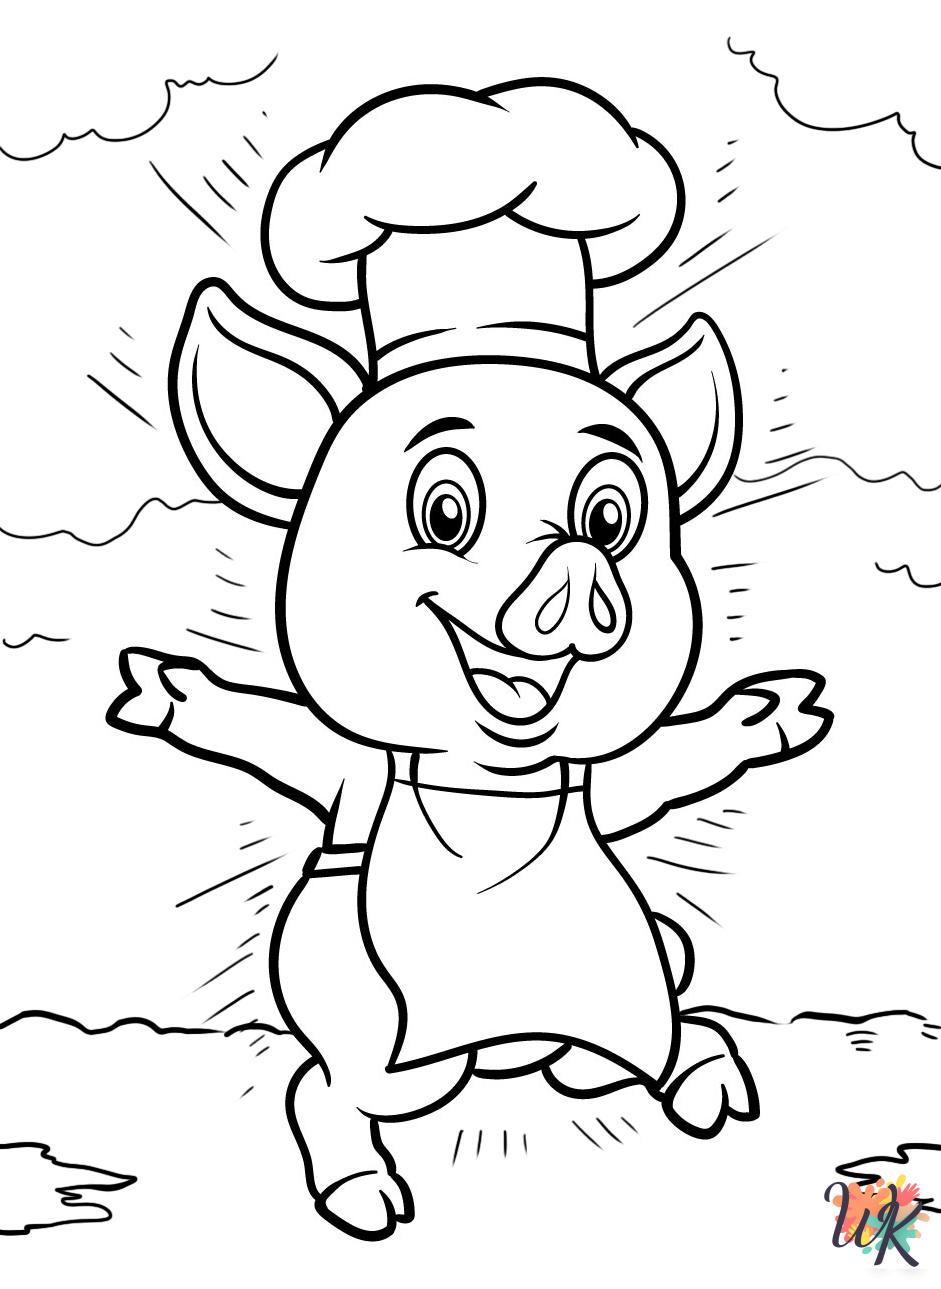 Pigs free coloring pages